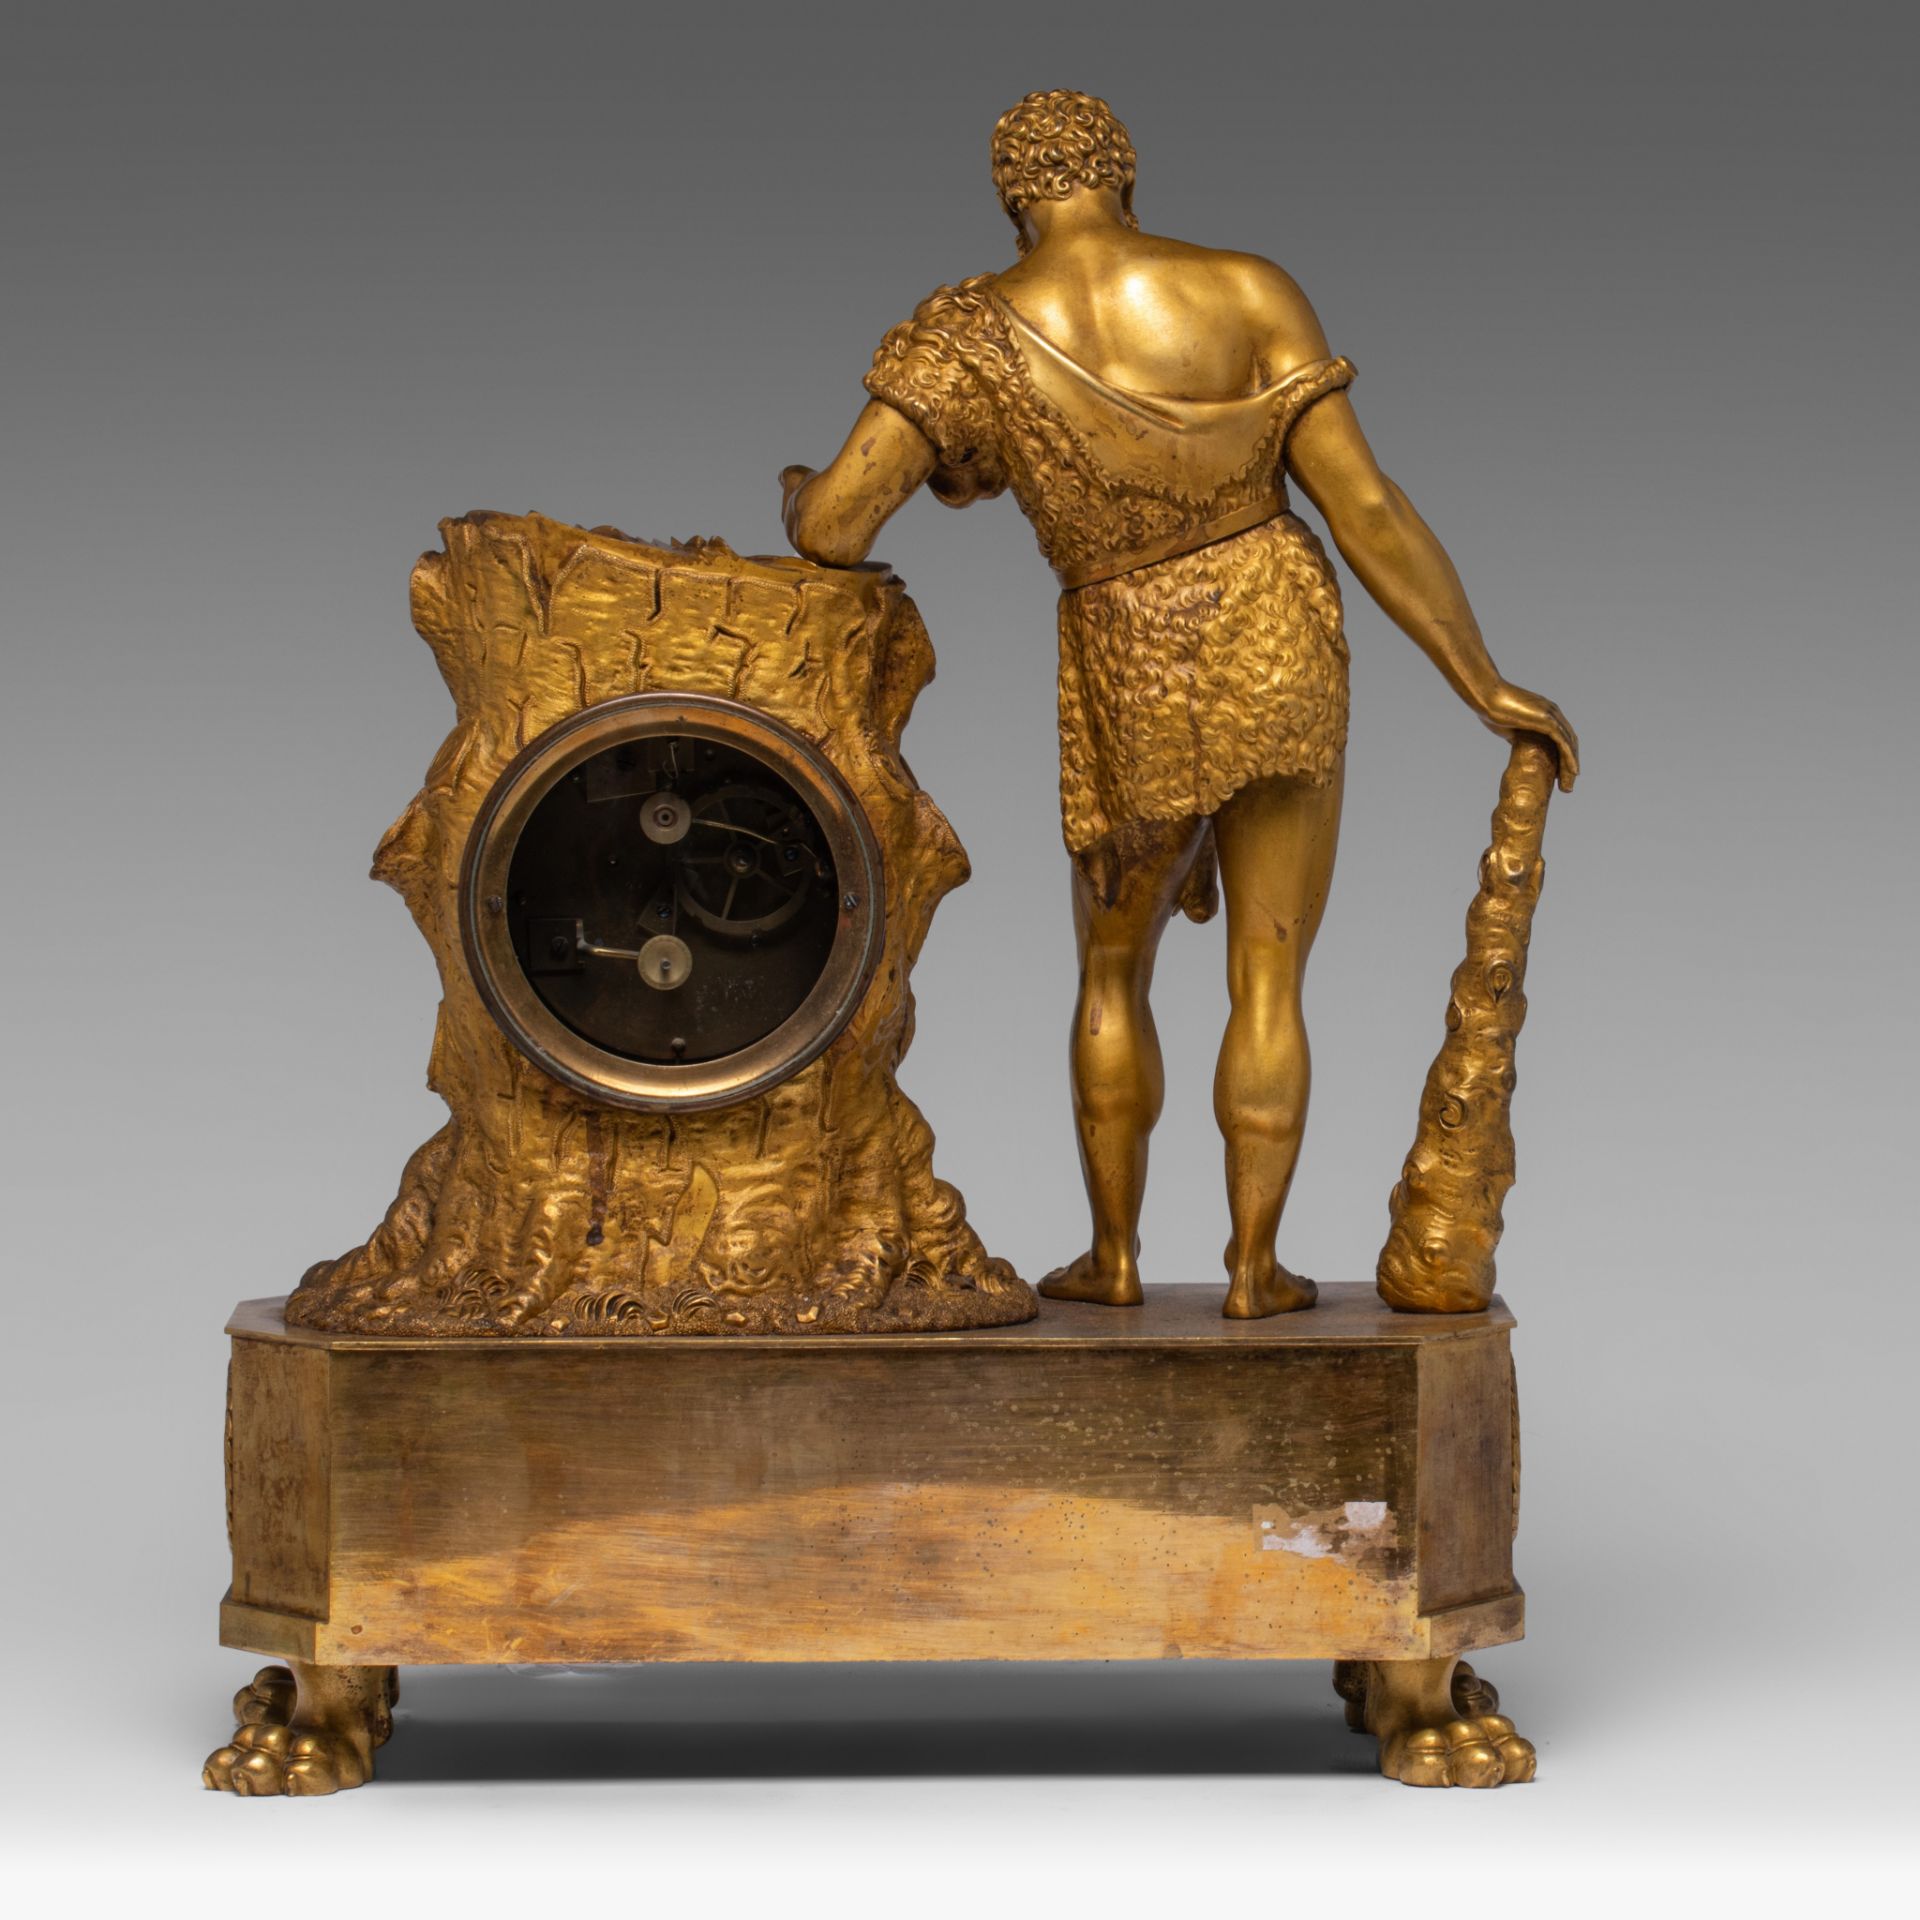 A French Empire gilt bronze mantle clock with Hercules, H 49 cm - Image 4 of 8